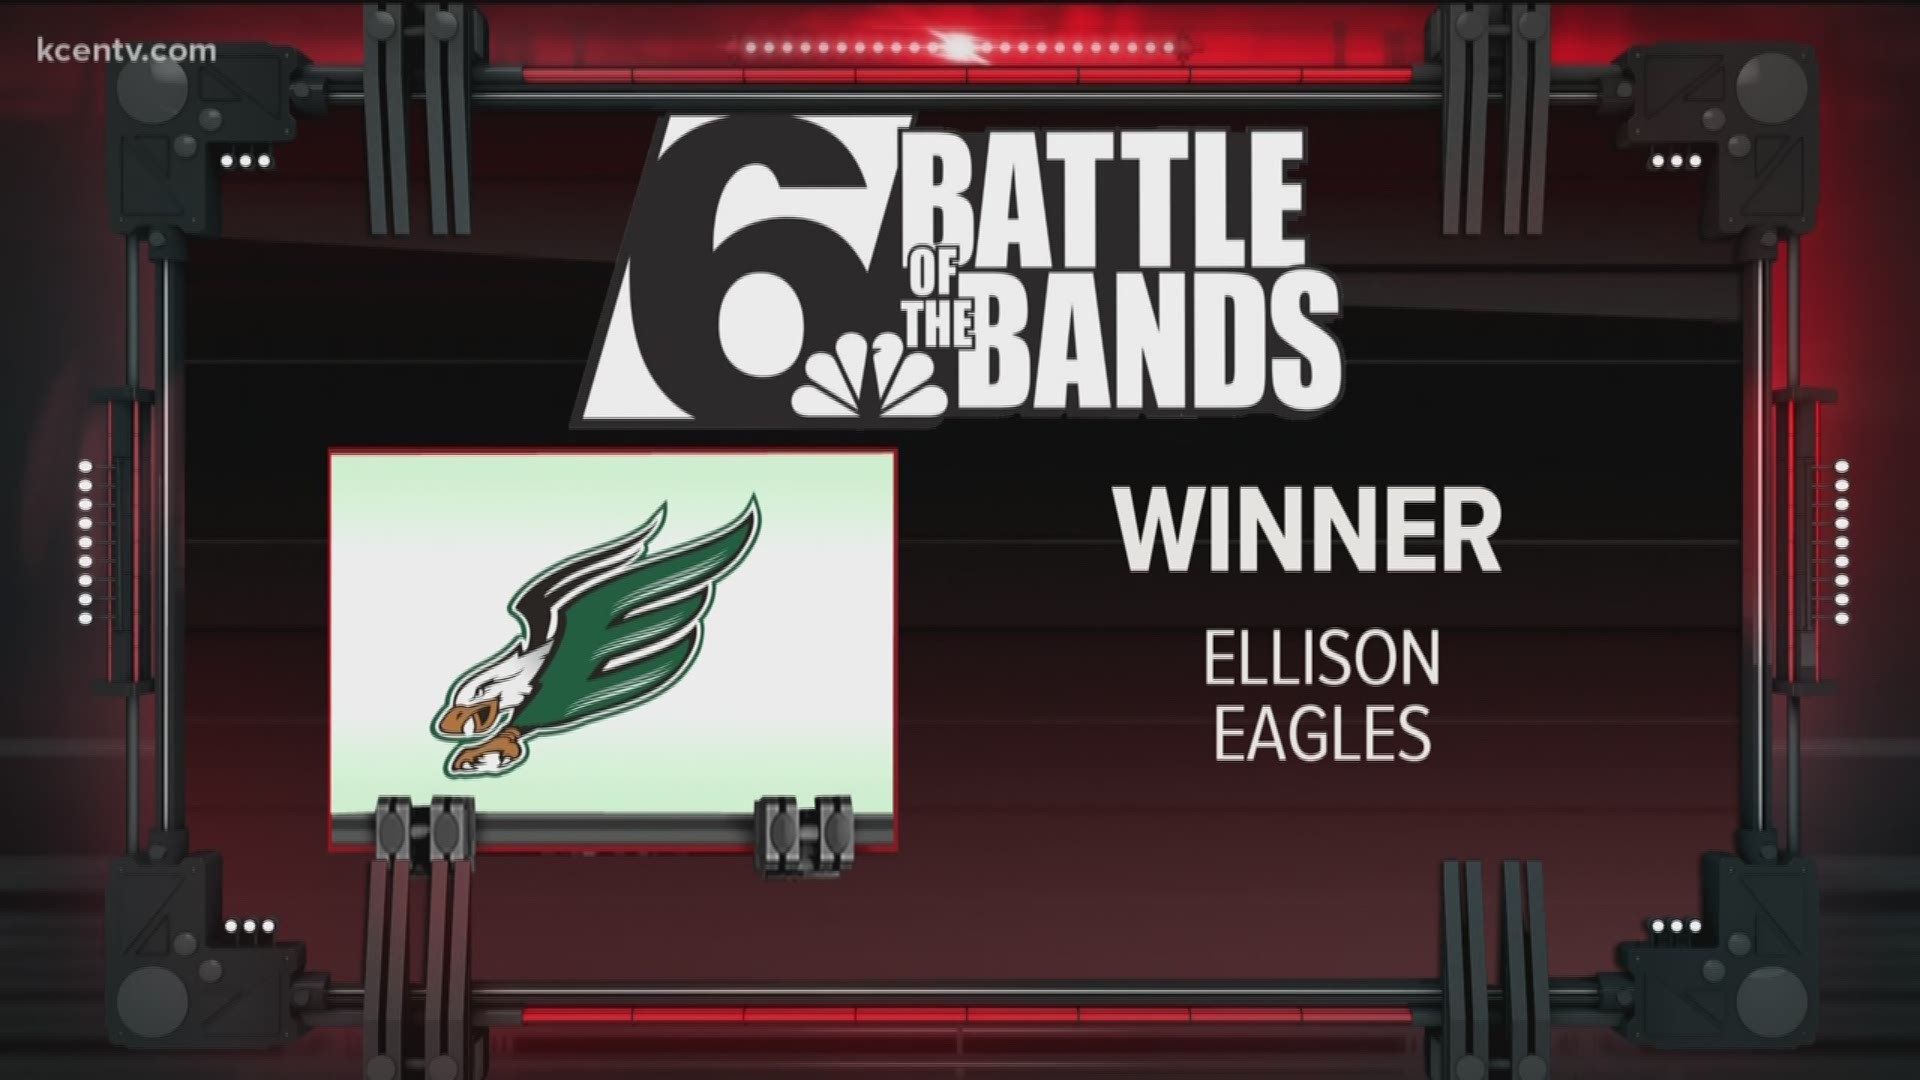 Congratulations to the Ellison Eagles for winning Week 4 of Battle of the Bands.